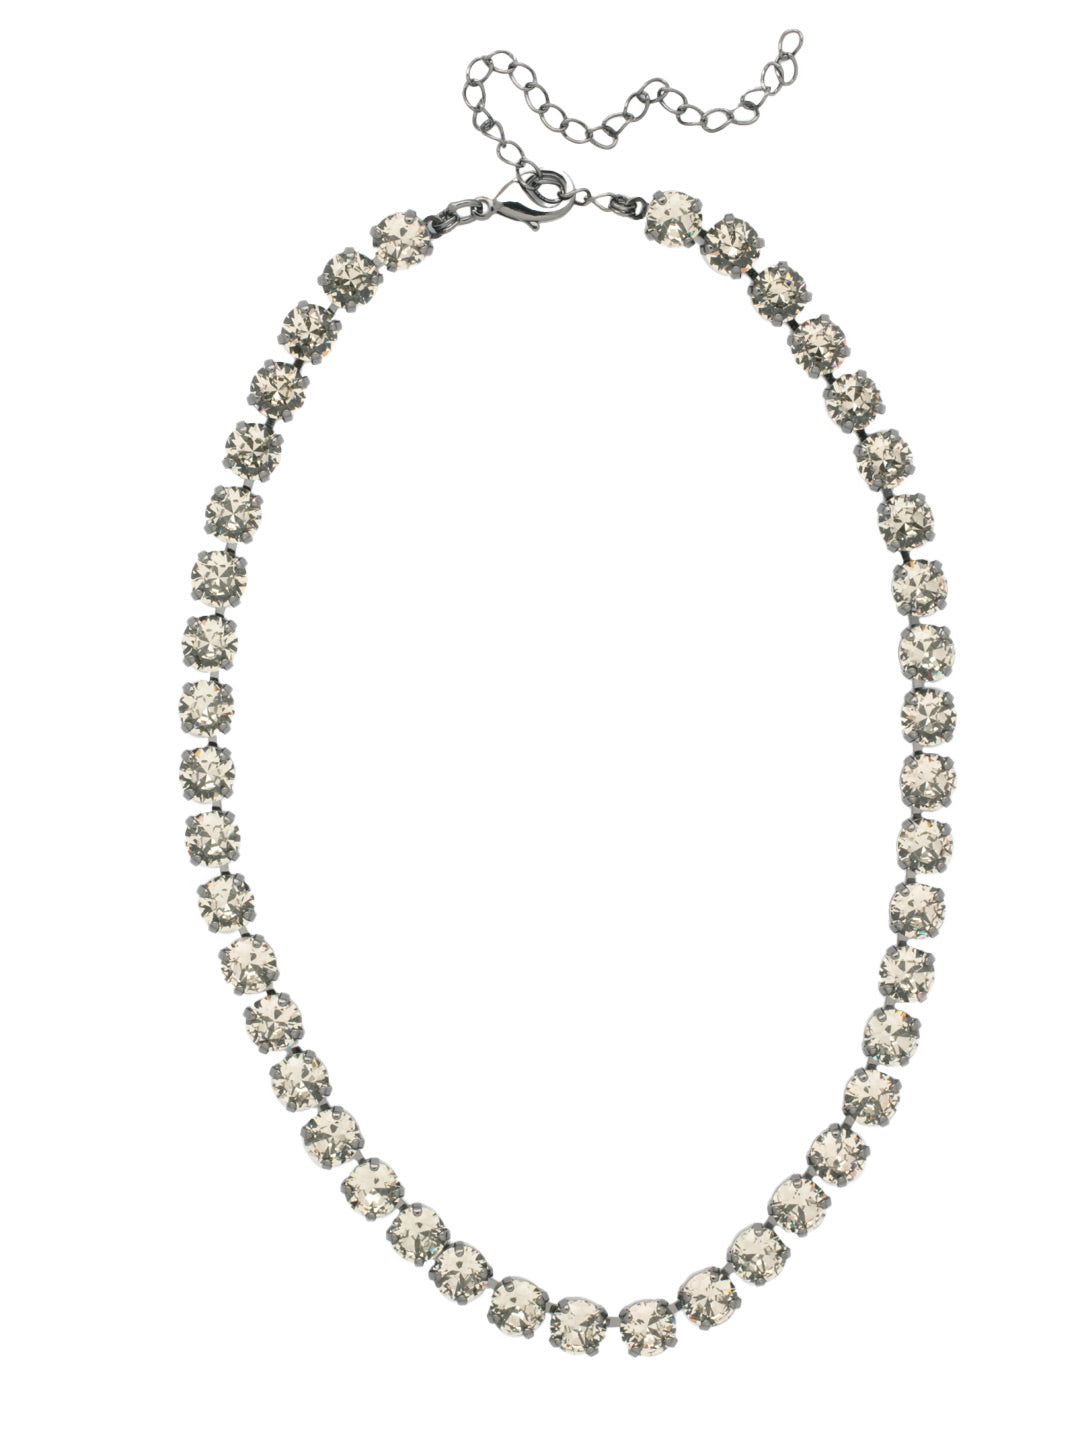 Matilda Tennis Necklace - NFJ4GMBD - <p>The Matilda Tennis Necklace features a repeating line of round cut crystals on an adjustable chain, secured with a lobster claw clasp. From Sorrelli's Black Diamond collection in our Gun Metal finish.</p>